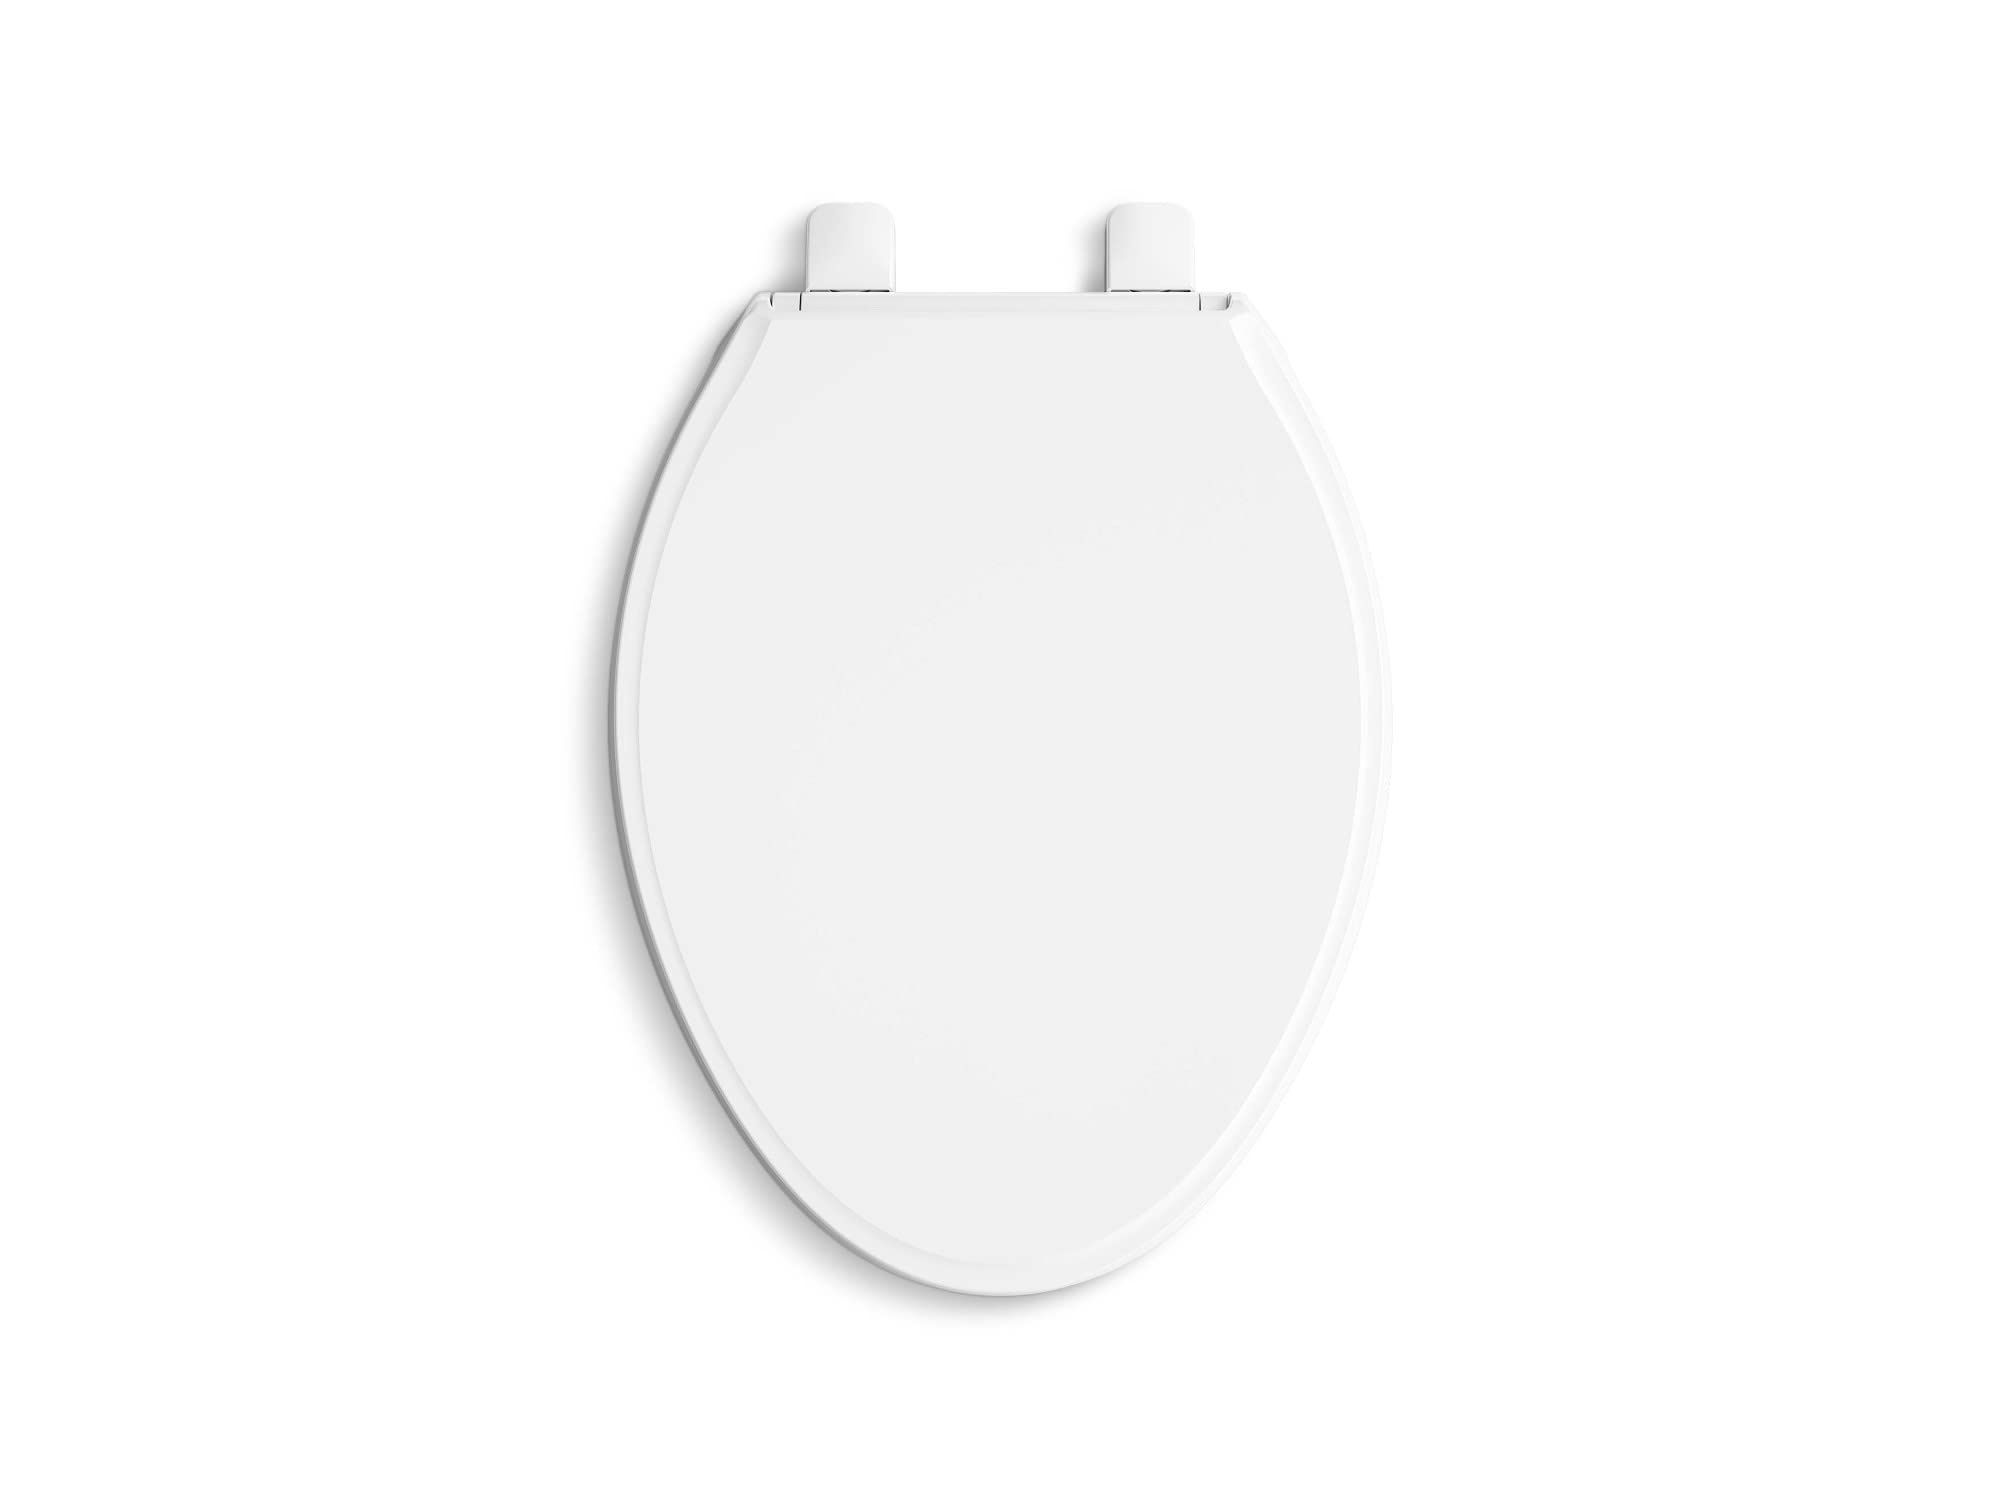 KOHLER 24295-0 Figure ReadyLatch Elongated Toilet Seat, Quiet-Close Lid and Seat, Countoured Seat, Grip-Tight Bumpers and Installation Hardware, White